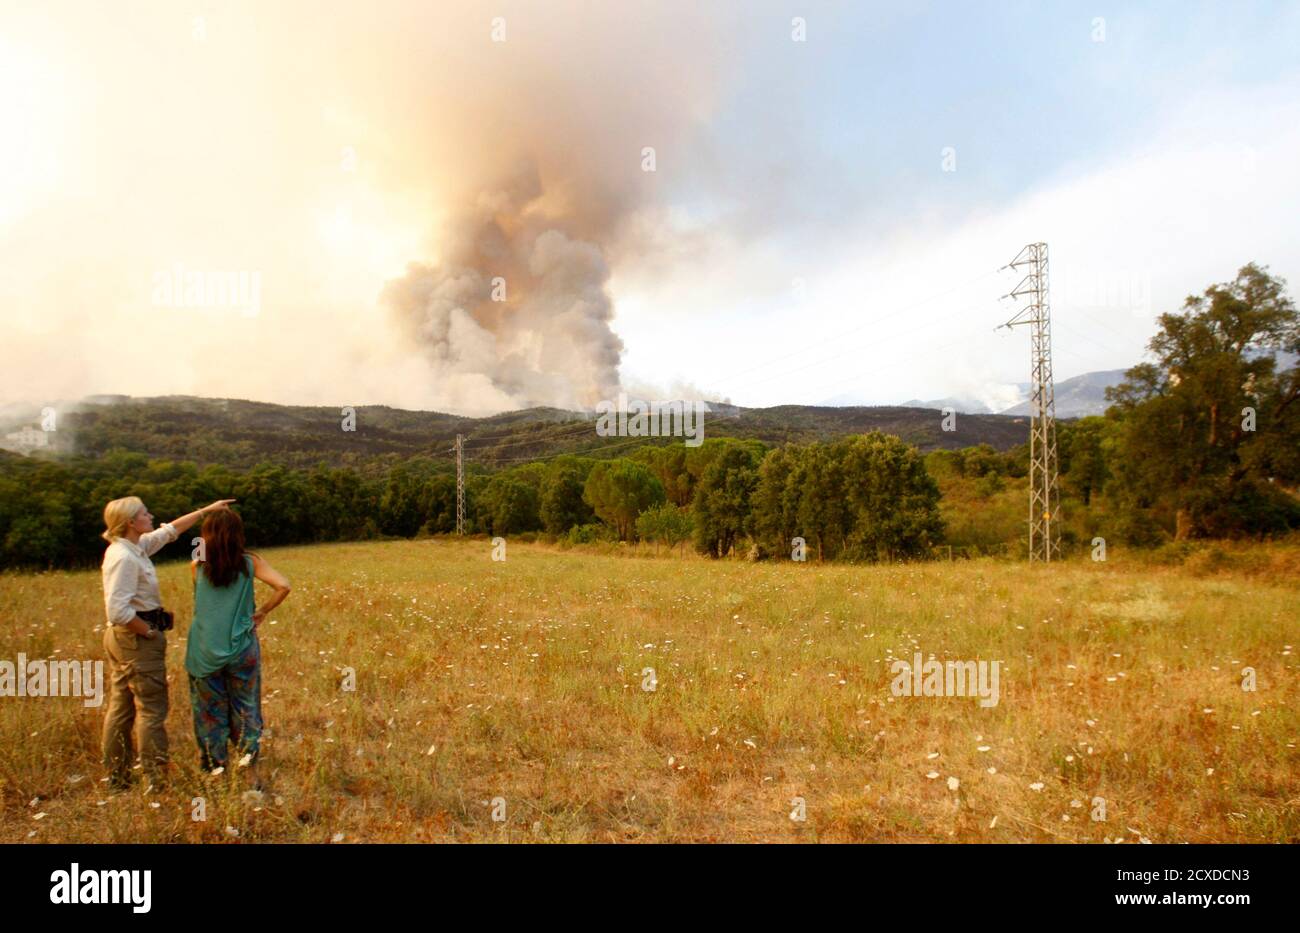 People point to the smoke near Agullana town in the Spanish province of Girona, July 23, 2012. Two big forest fires raging in the border area between France and northern Catalonia in Spain since Sunday have killed a fourth person, local authorities said on Monday, as strong winds hindered efforts to control the blaze. REUTERS/Albert Gea (SPAIN - Tags: DISASTER ENVIRONMENT) Stock Photo